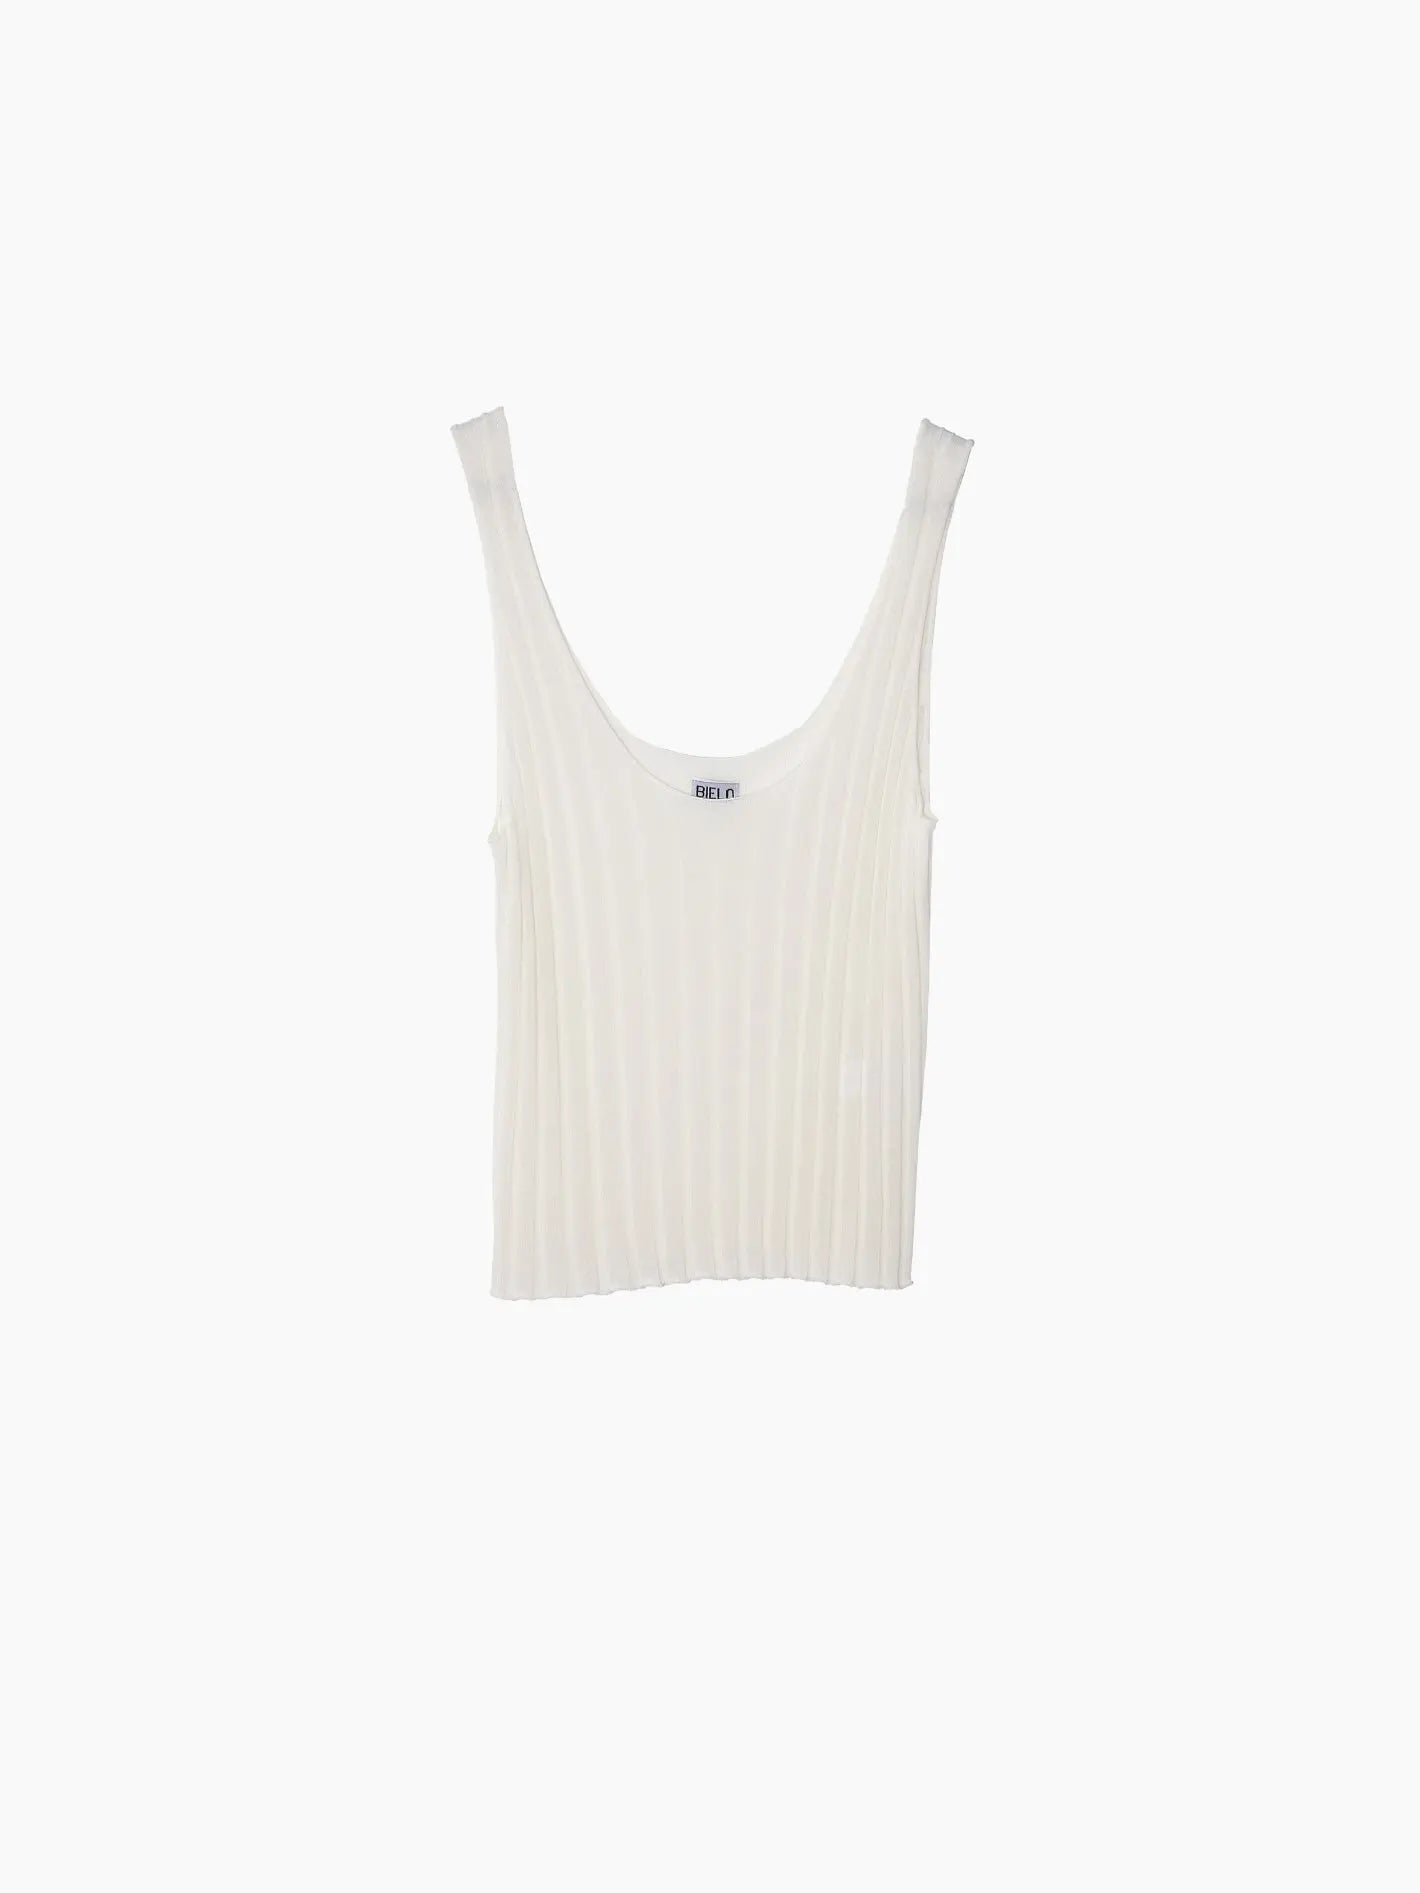 A Clava Top Ecru by Bielo with wide straps and a scoop neckline, available at bassalstore, displayed on a plain white background.